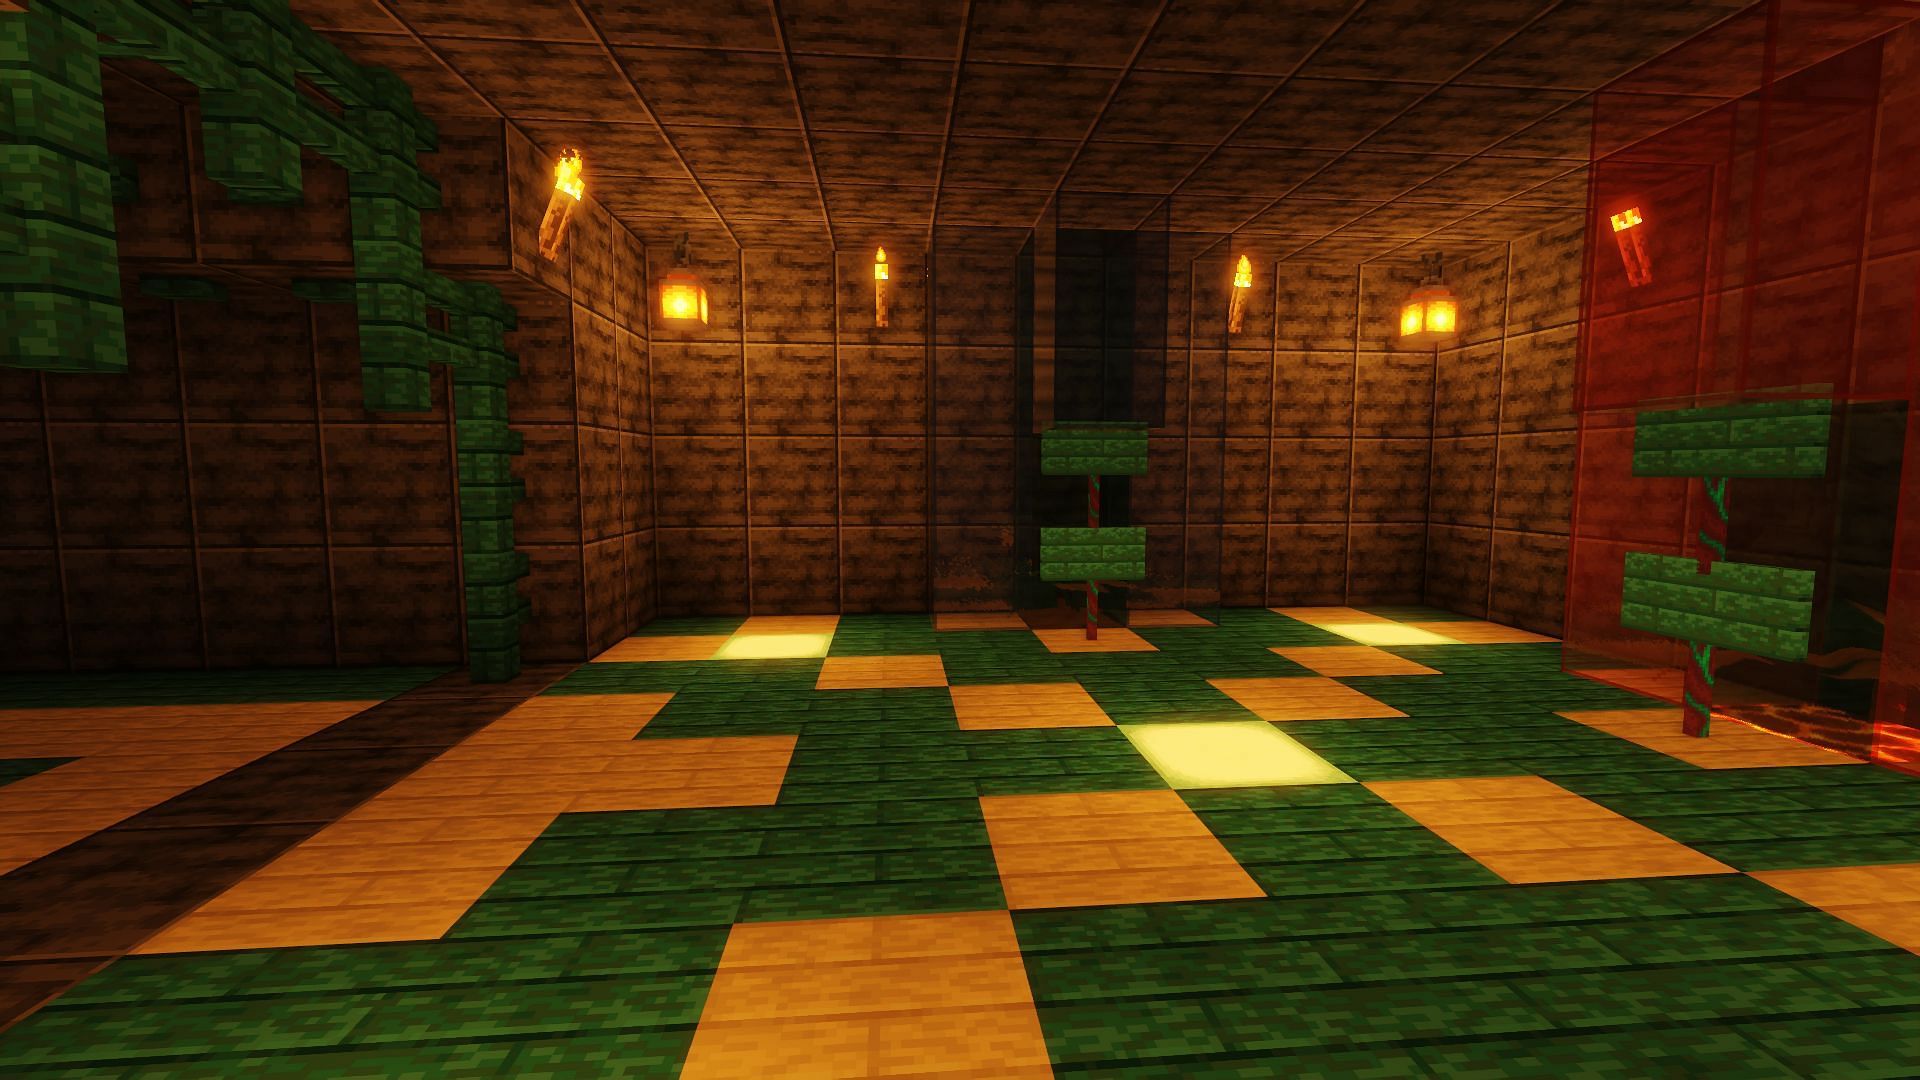 An example of an underground base using water elevators to get in and out (Image via Minecraft)